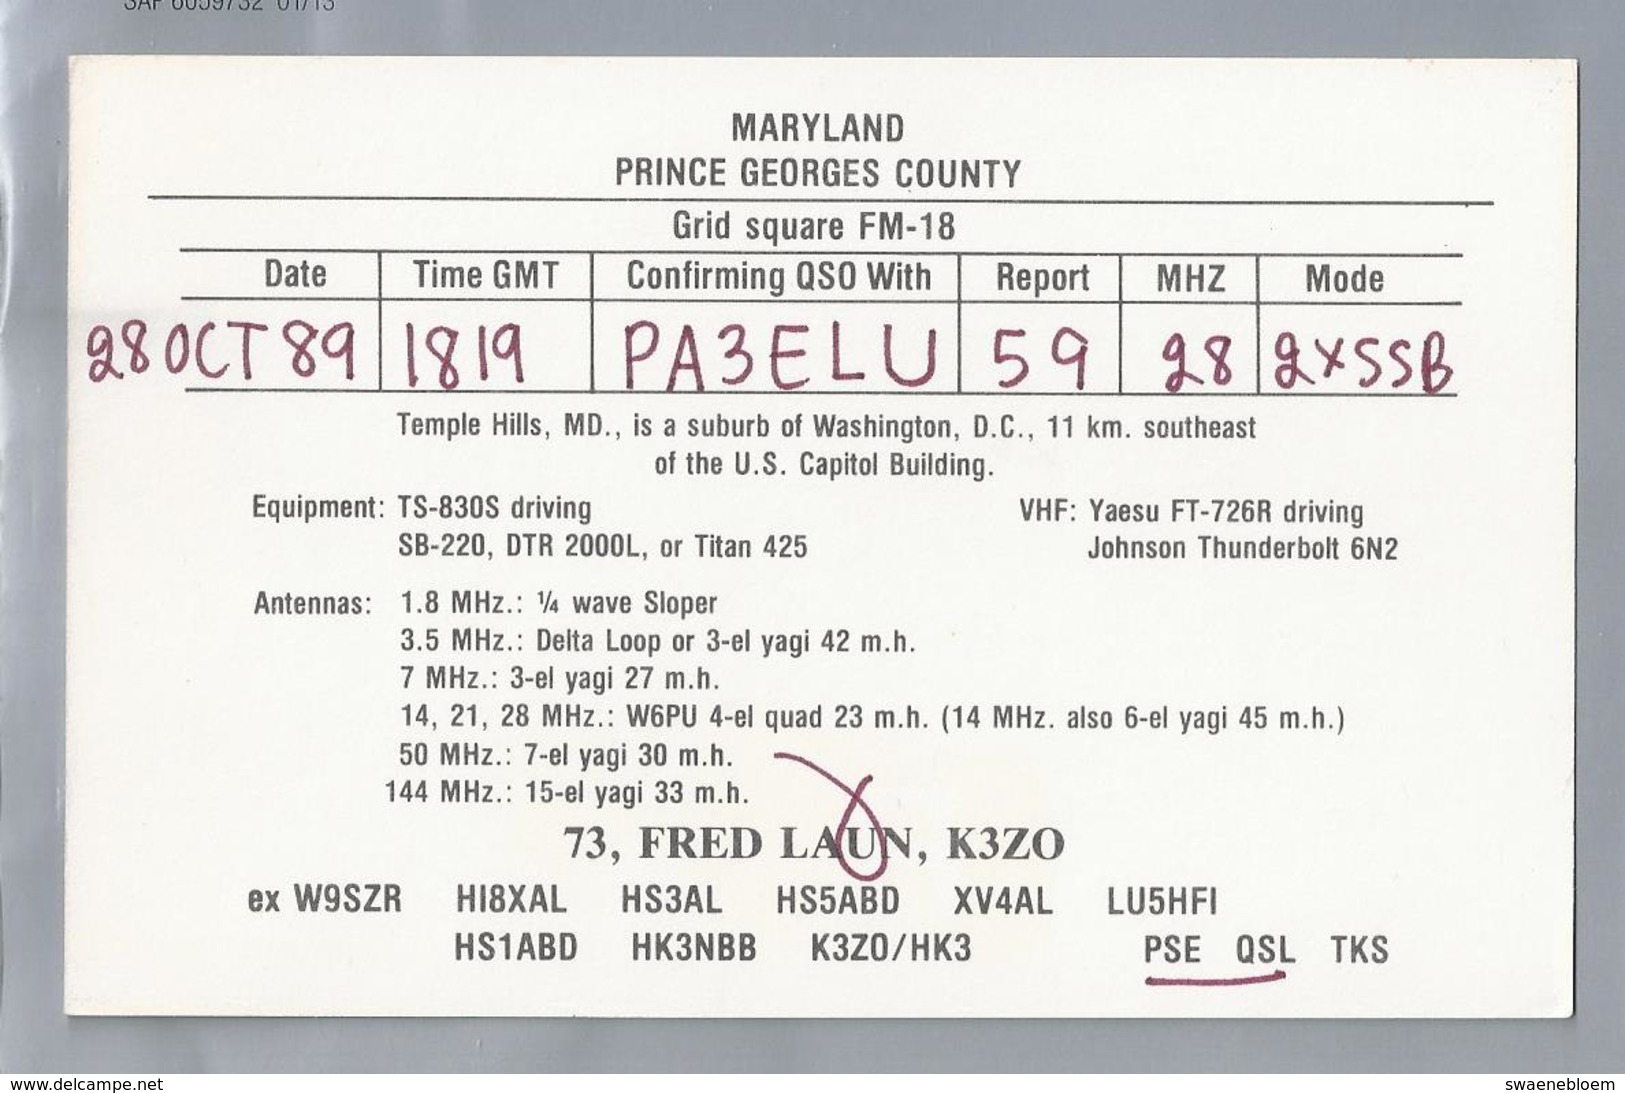 US.- QSL KAART. CARD. K3ZO. FRED LAUN, TEMPLE HILLS, MD. MARYLAND, PRINCE GEORGES COUNTY., U.S.A. - Radio-amateur